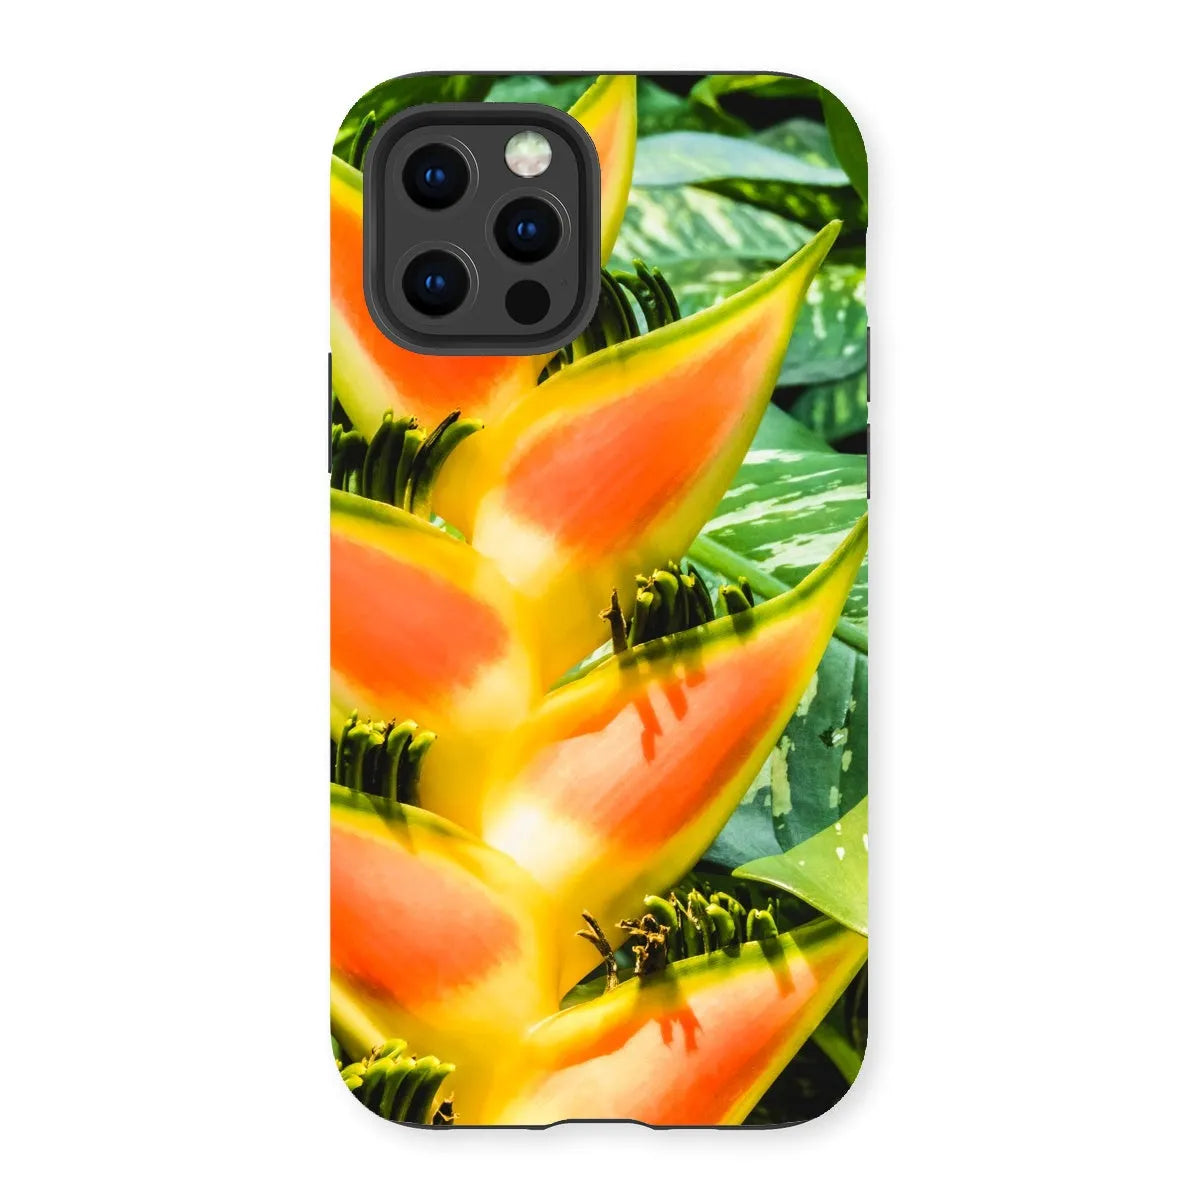 Showstopper Tough Phone Case - Iphone 13 Pro / Matte - Mobile Phone Cases - Aesthetic Art